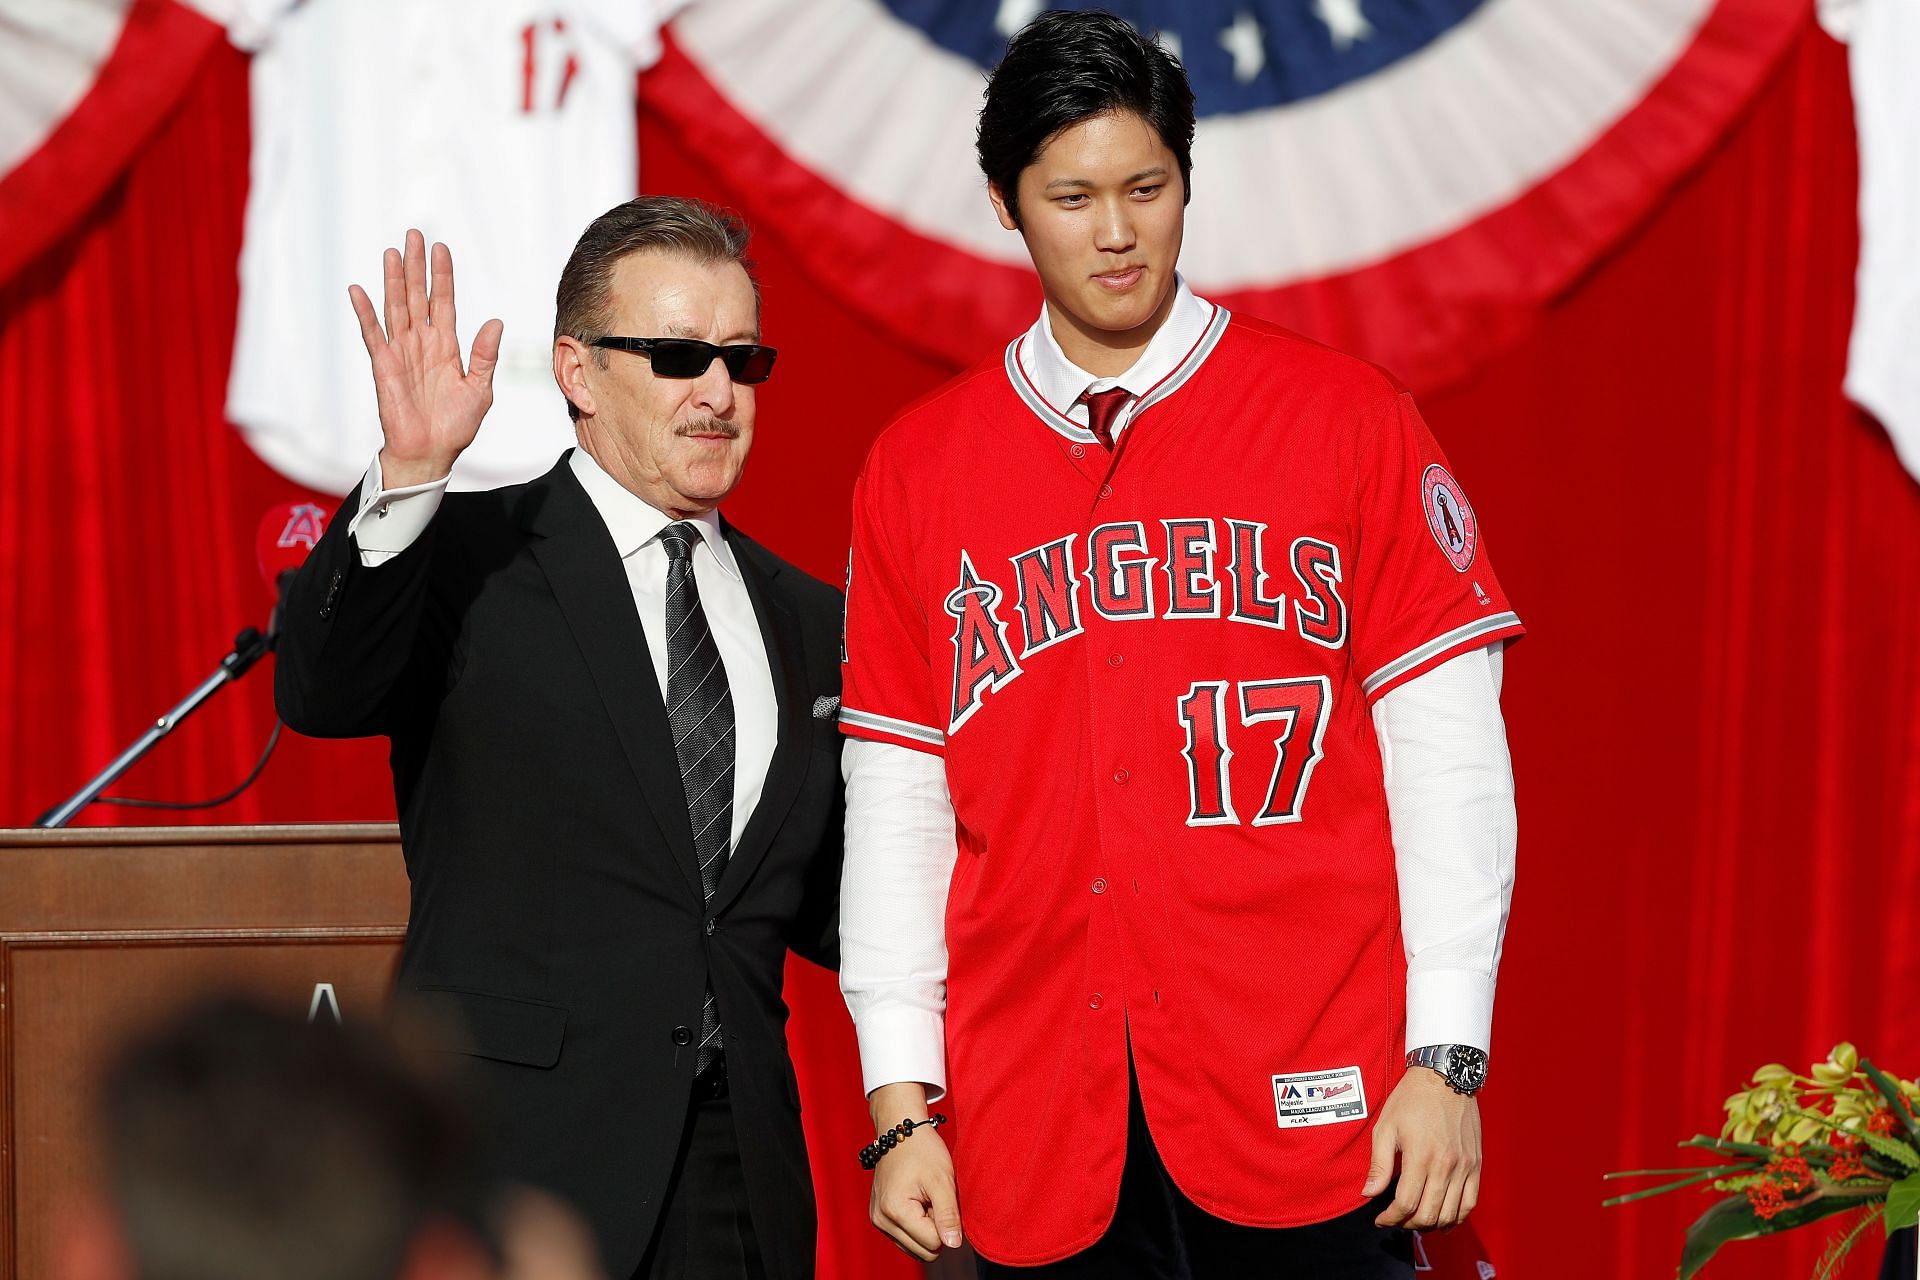 Los Angeles Angels fans react to owner Arte Moreno deciding not to